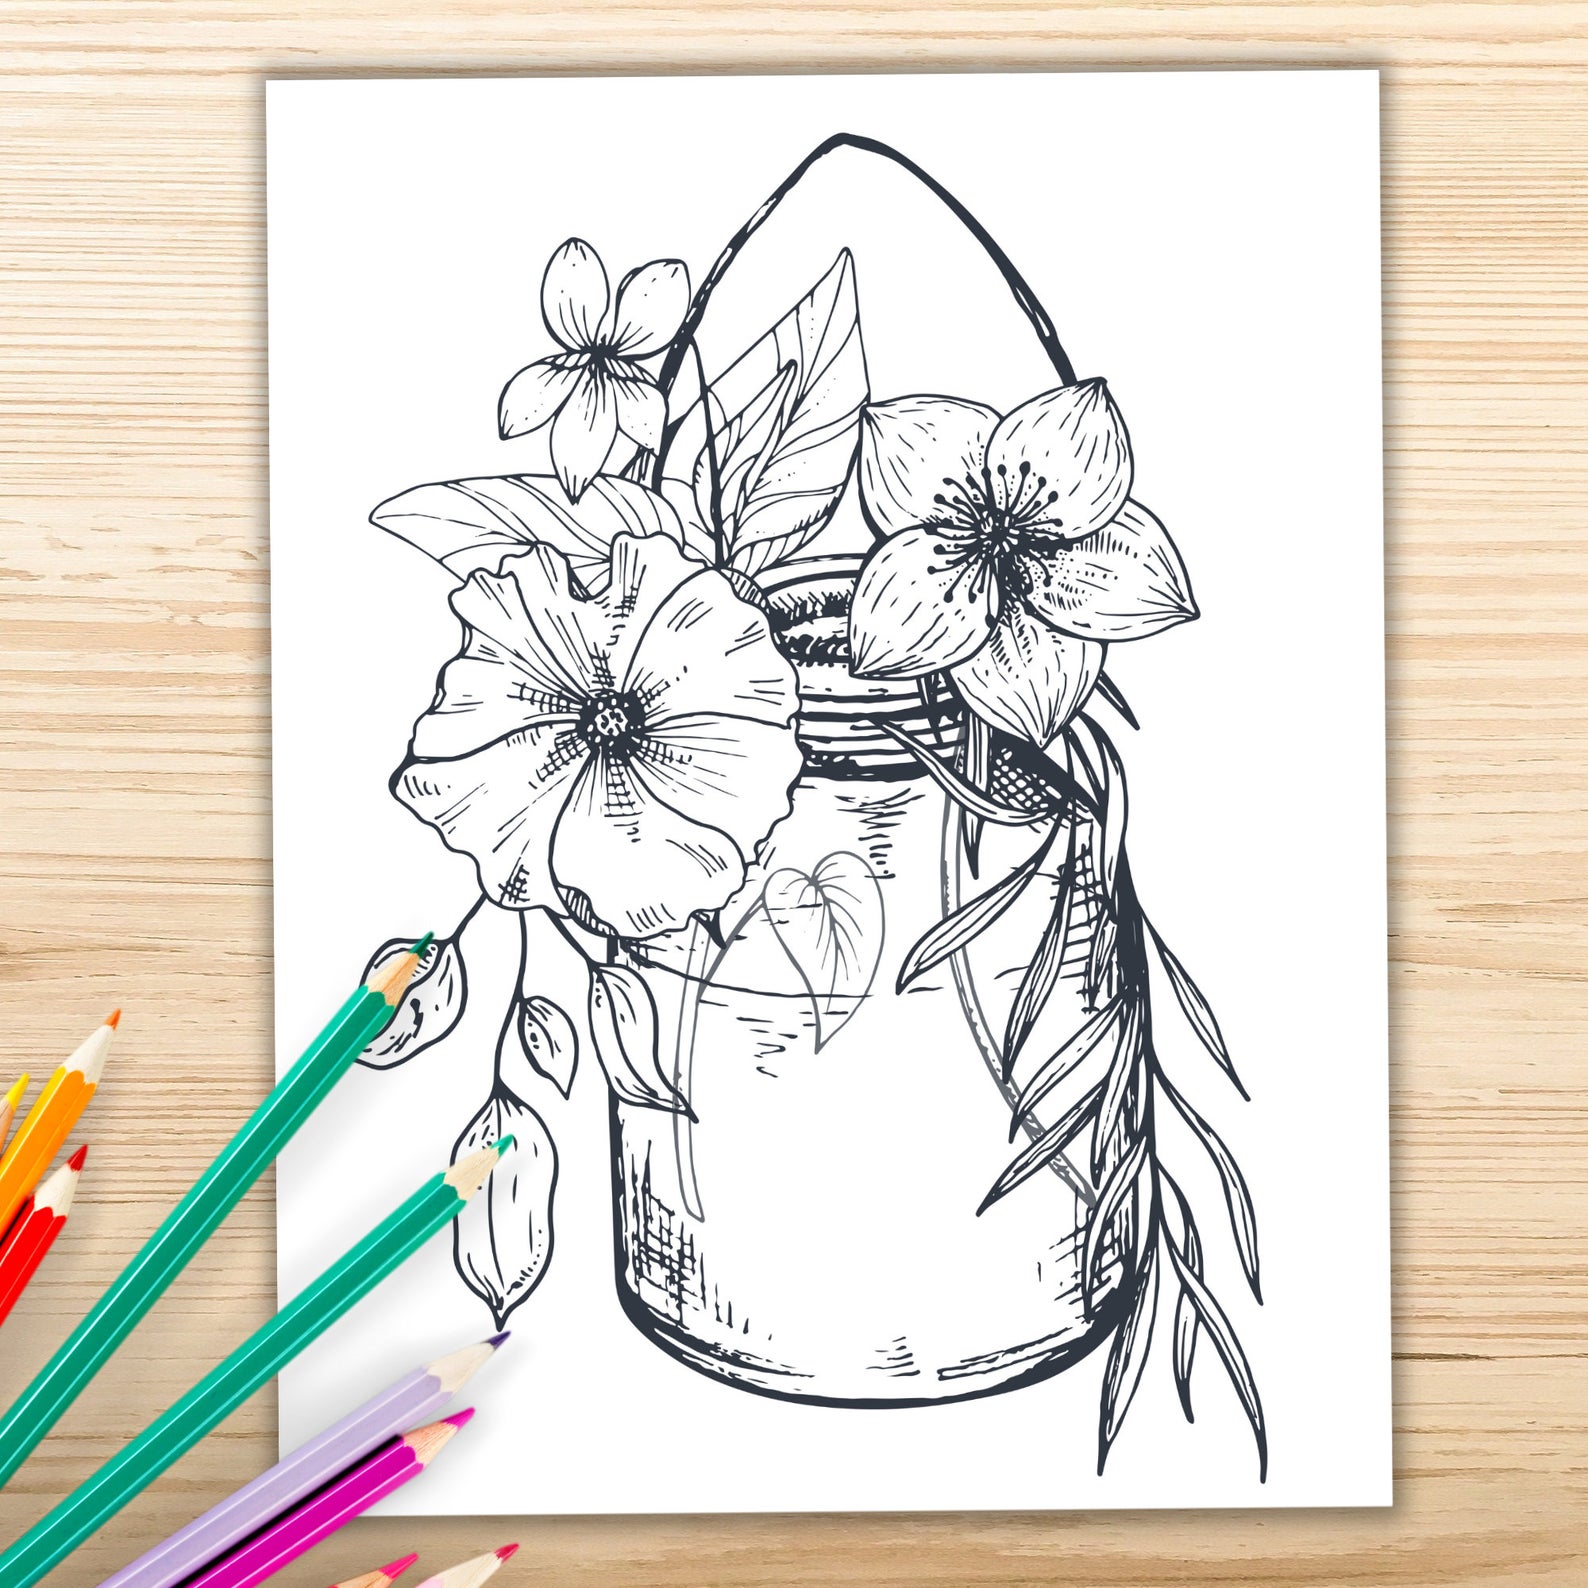 Printable Adult Coloring Pages From Etsy | Book Riot